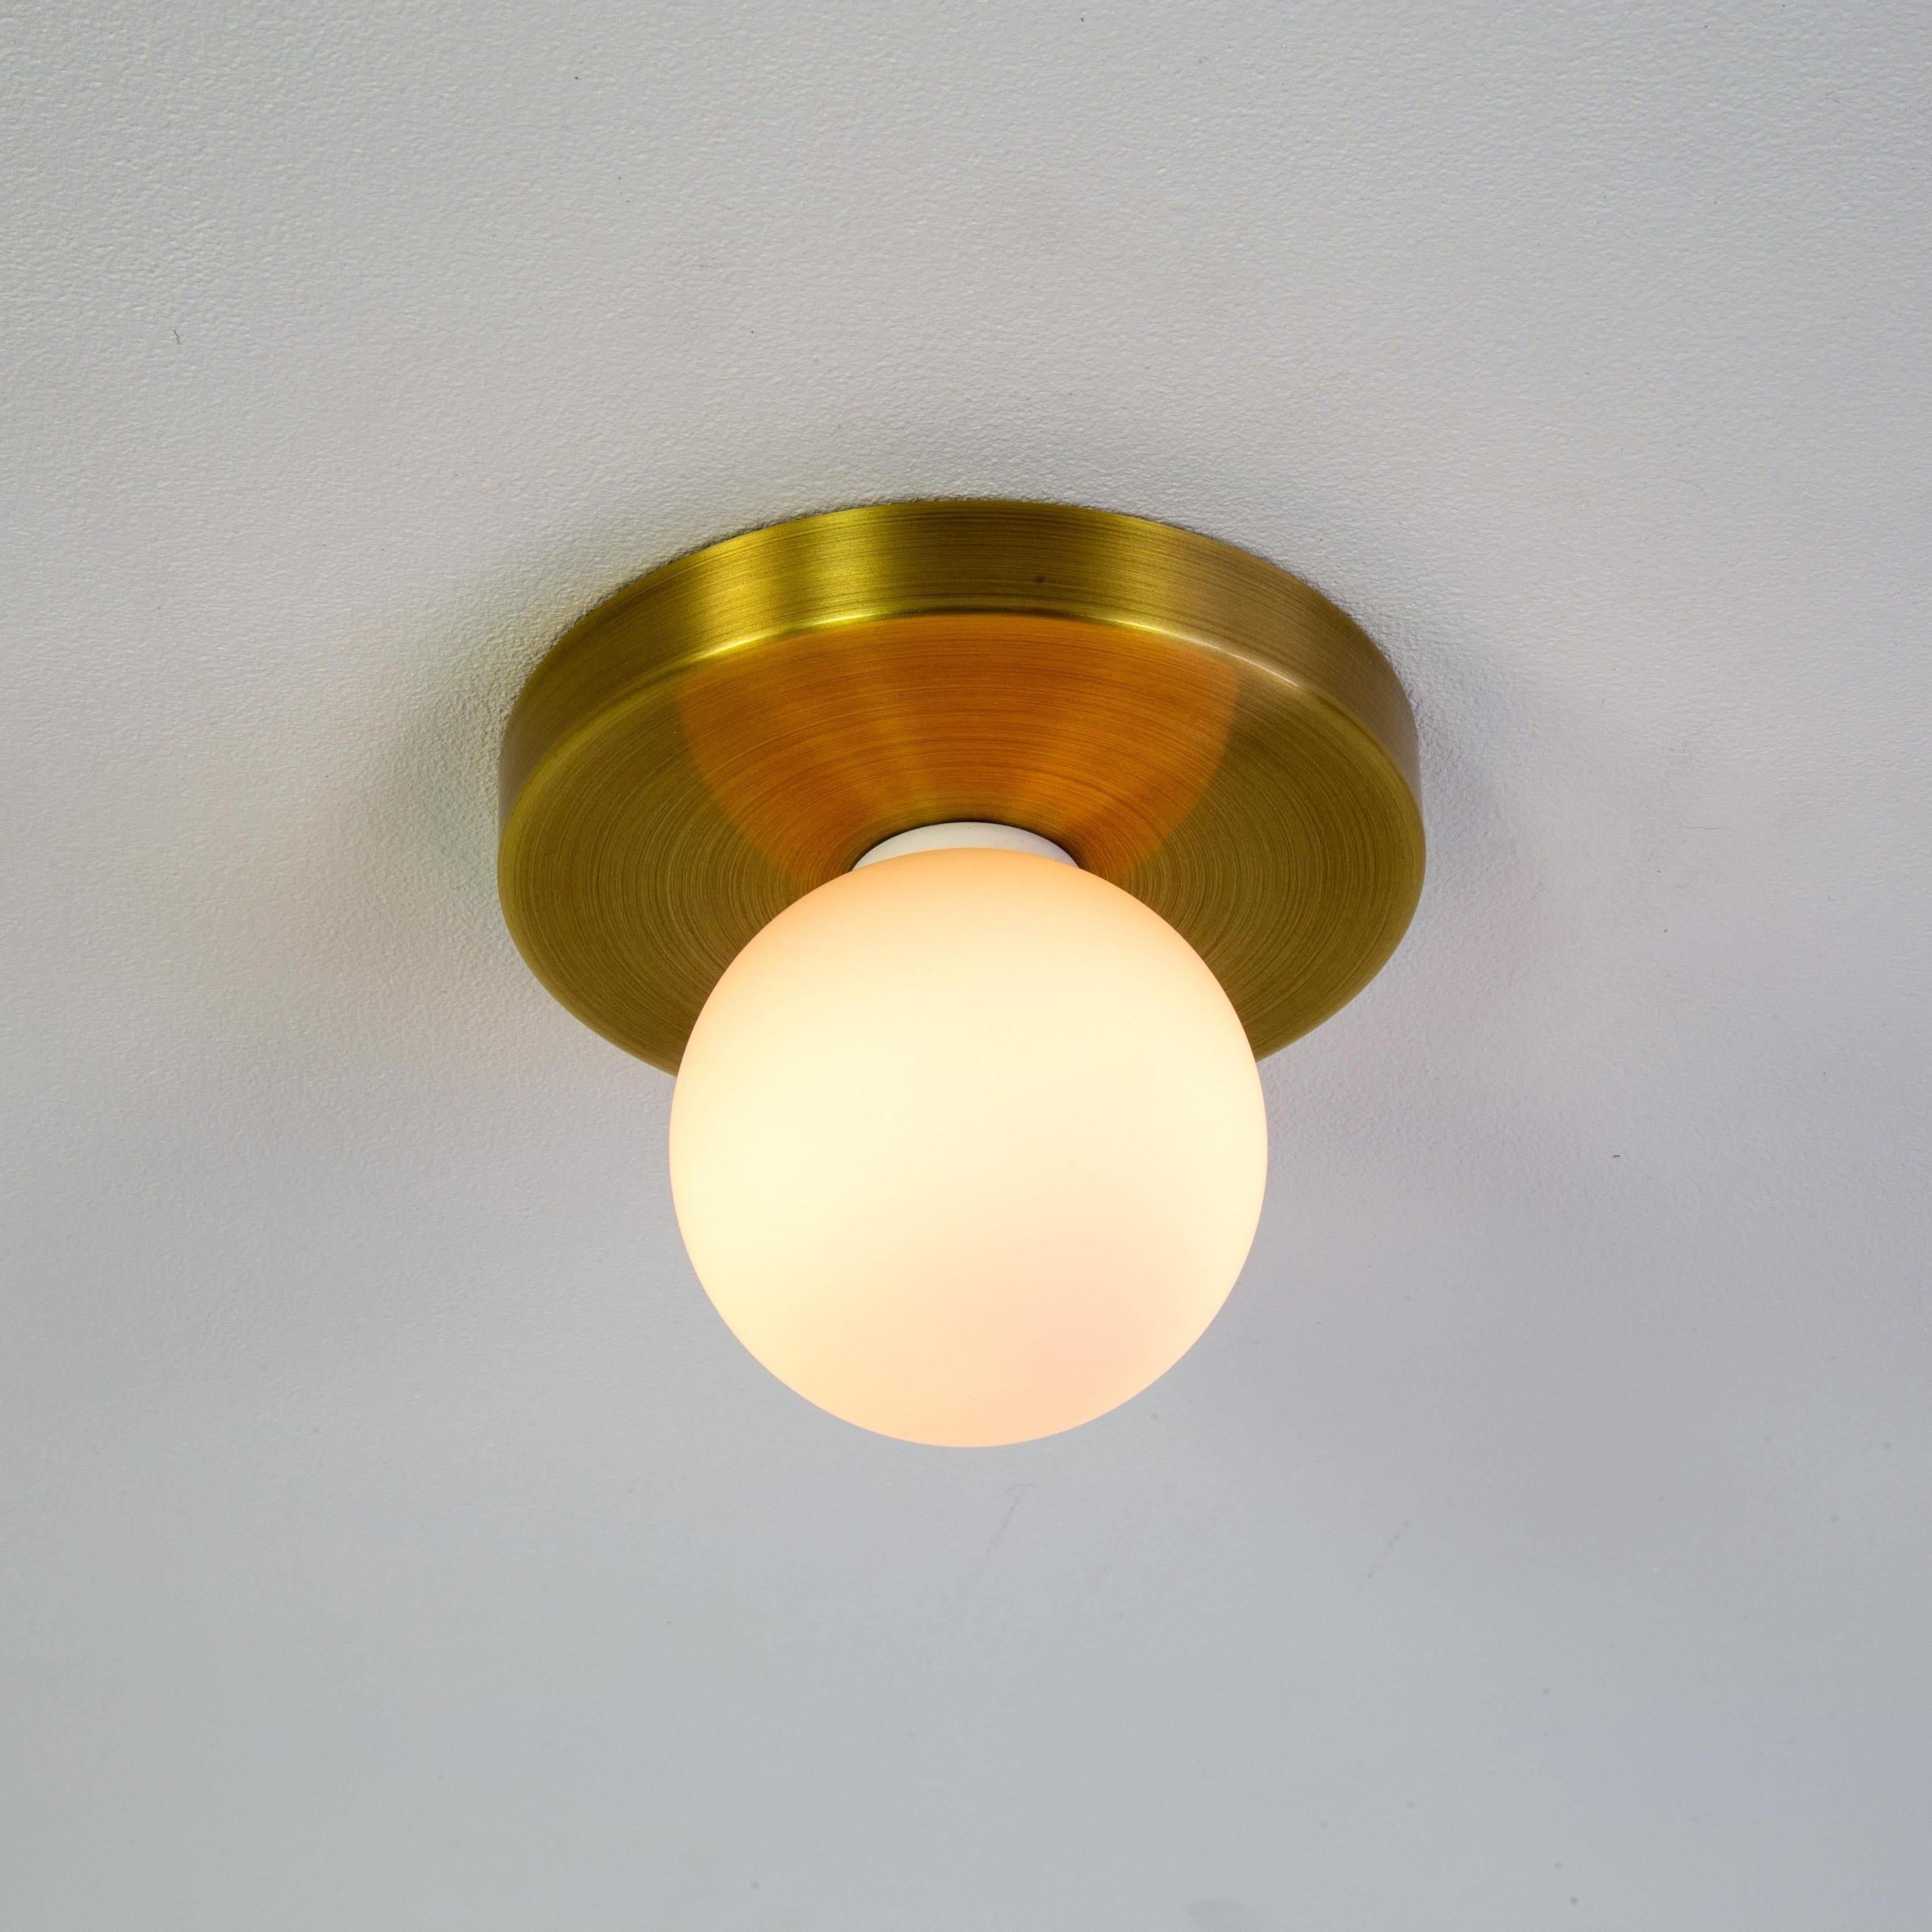 Modern Pair of Globe Flush Mounts by Research.Lighting, Brushed Brass, Made to Order For Sale